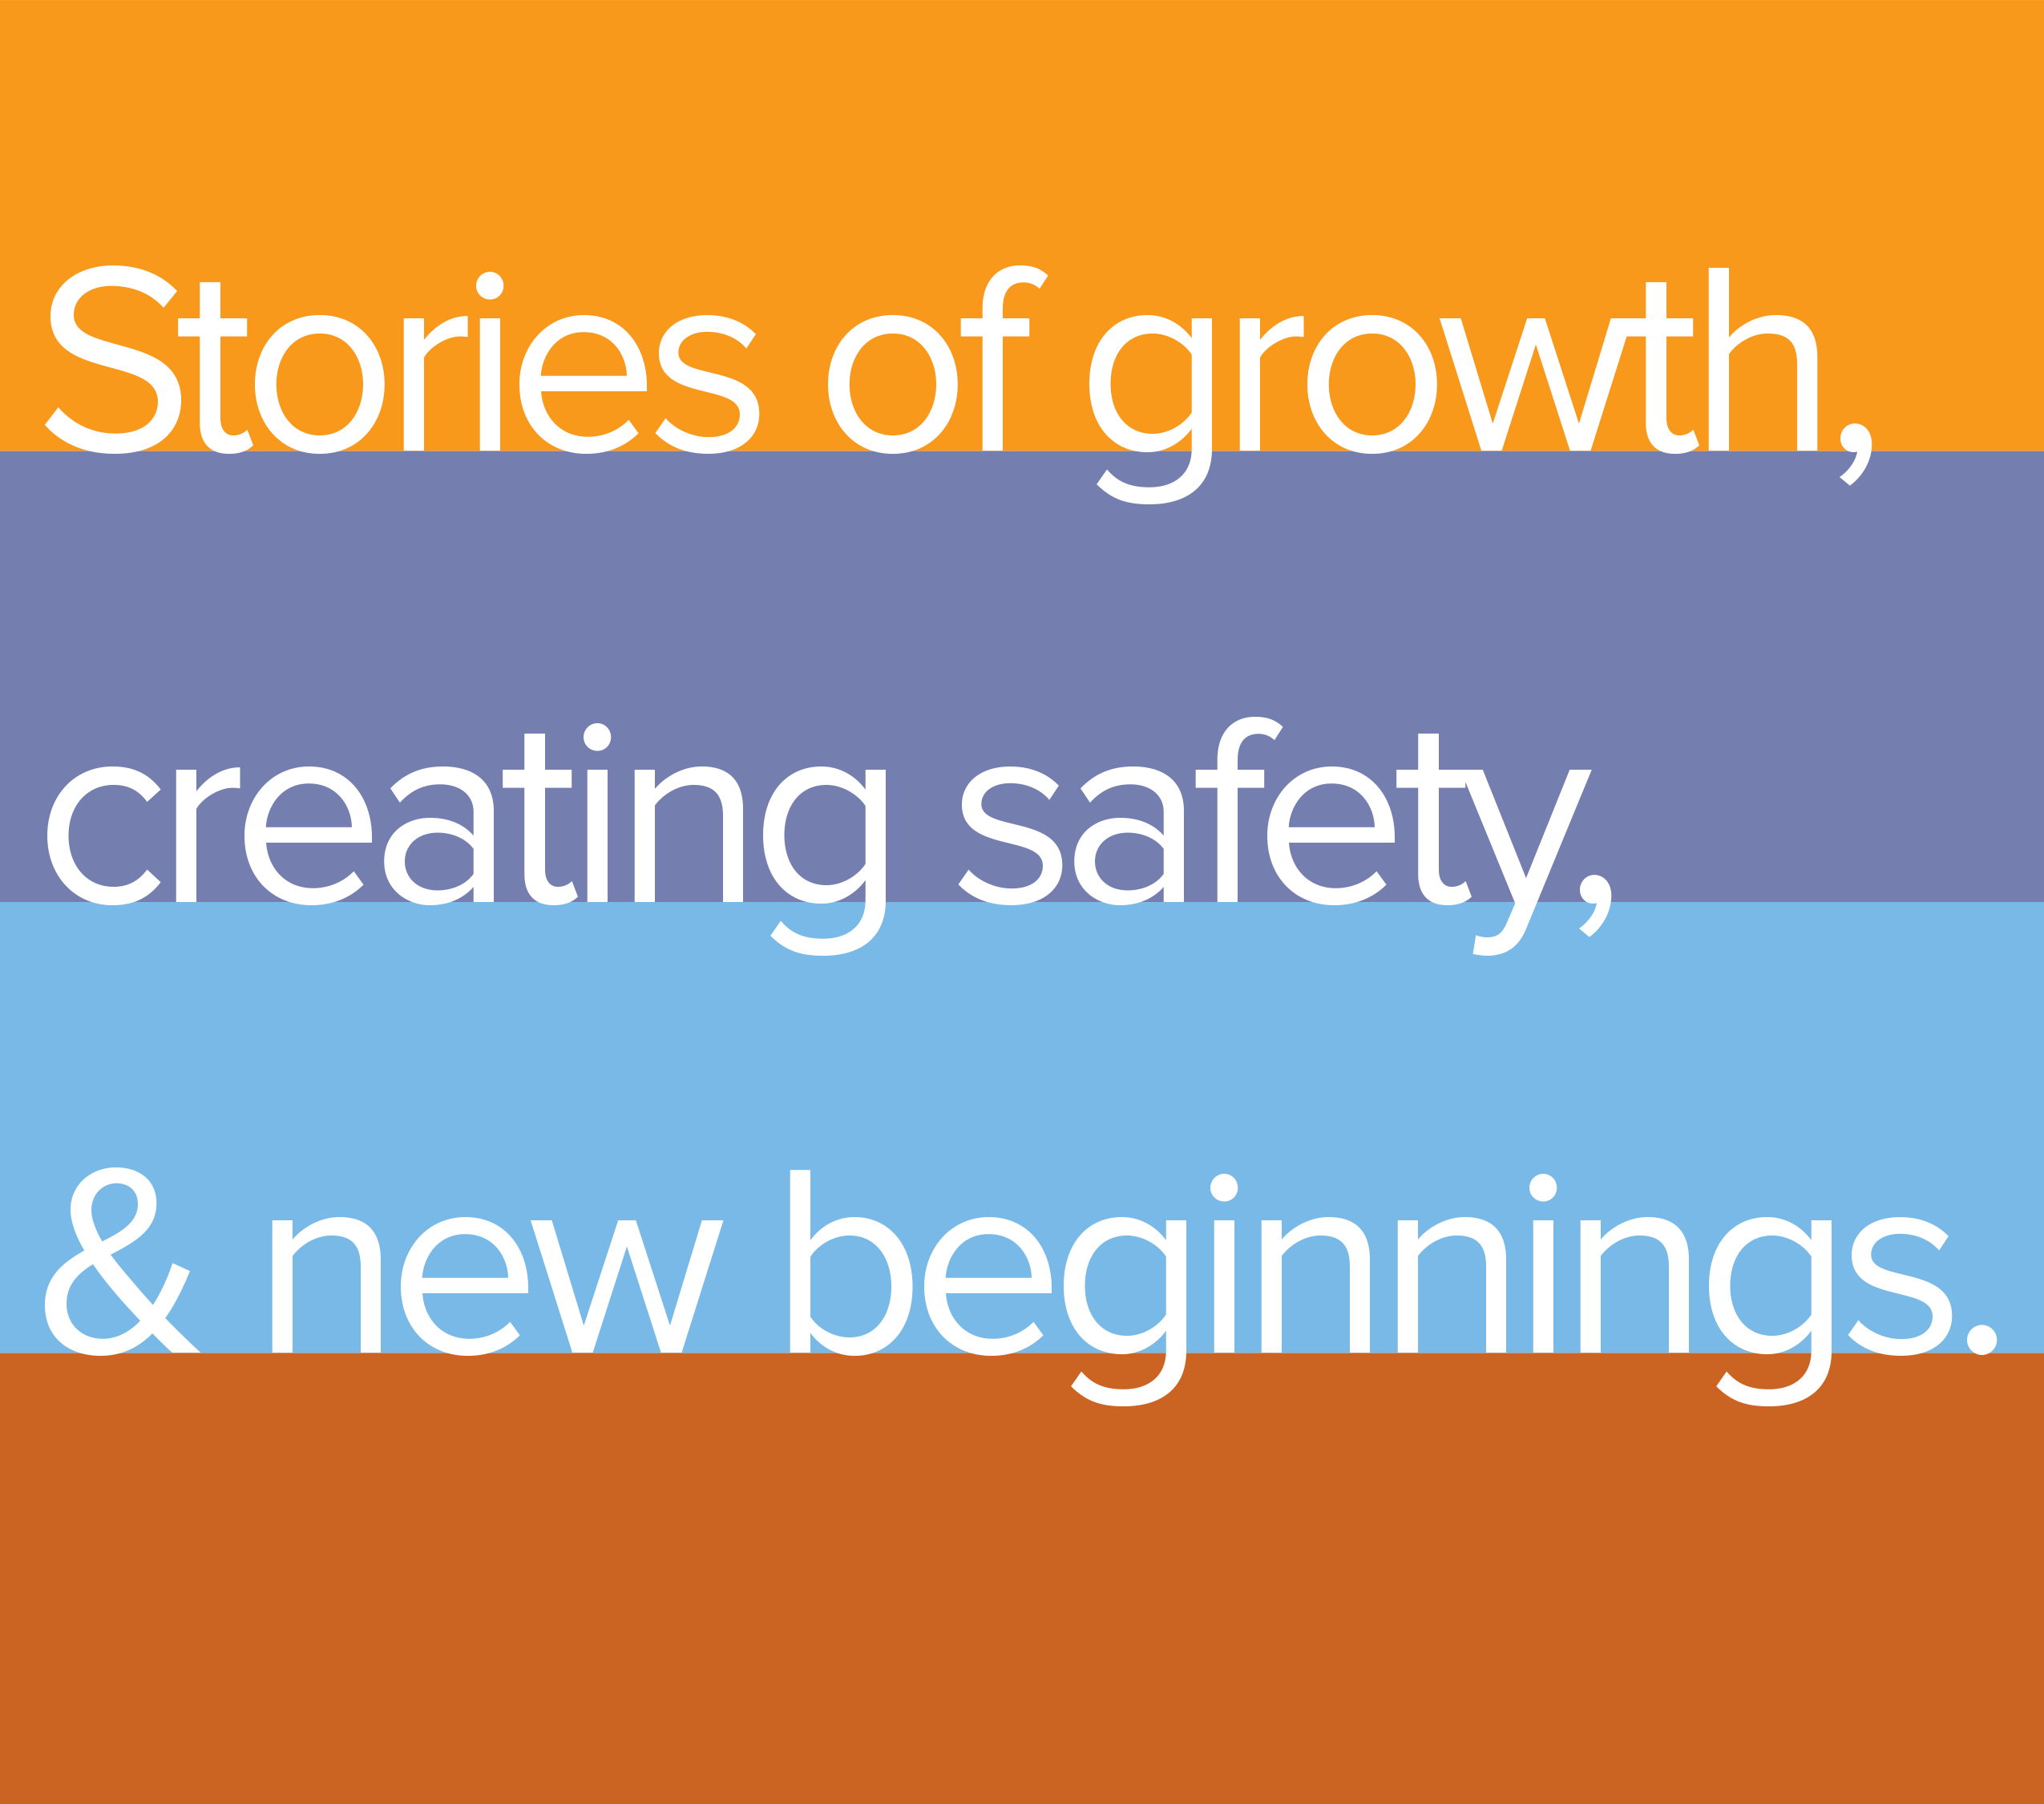 Stories of growth, creating safety, & new beginnings.